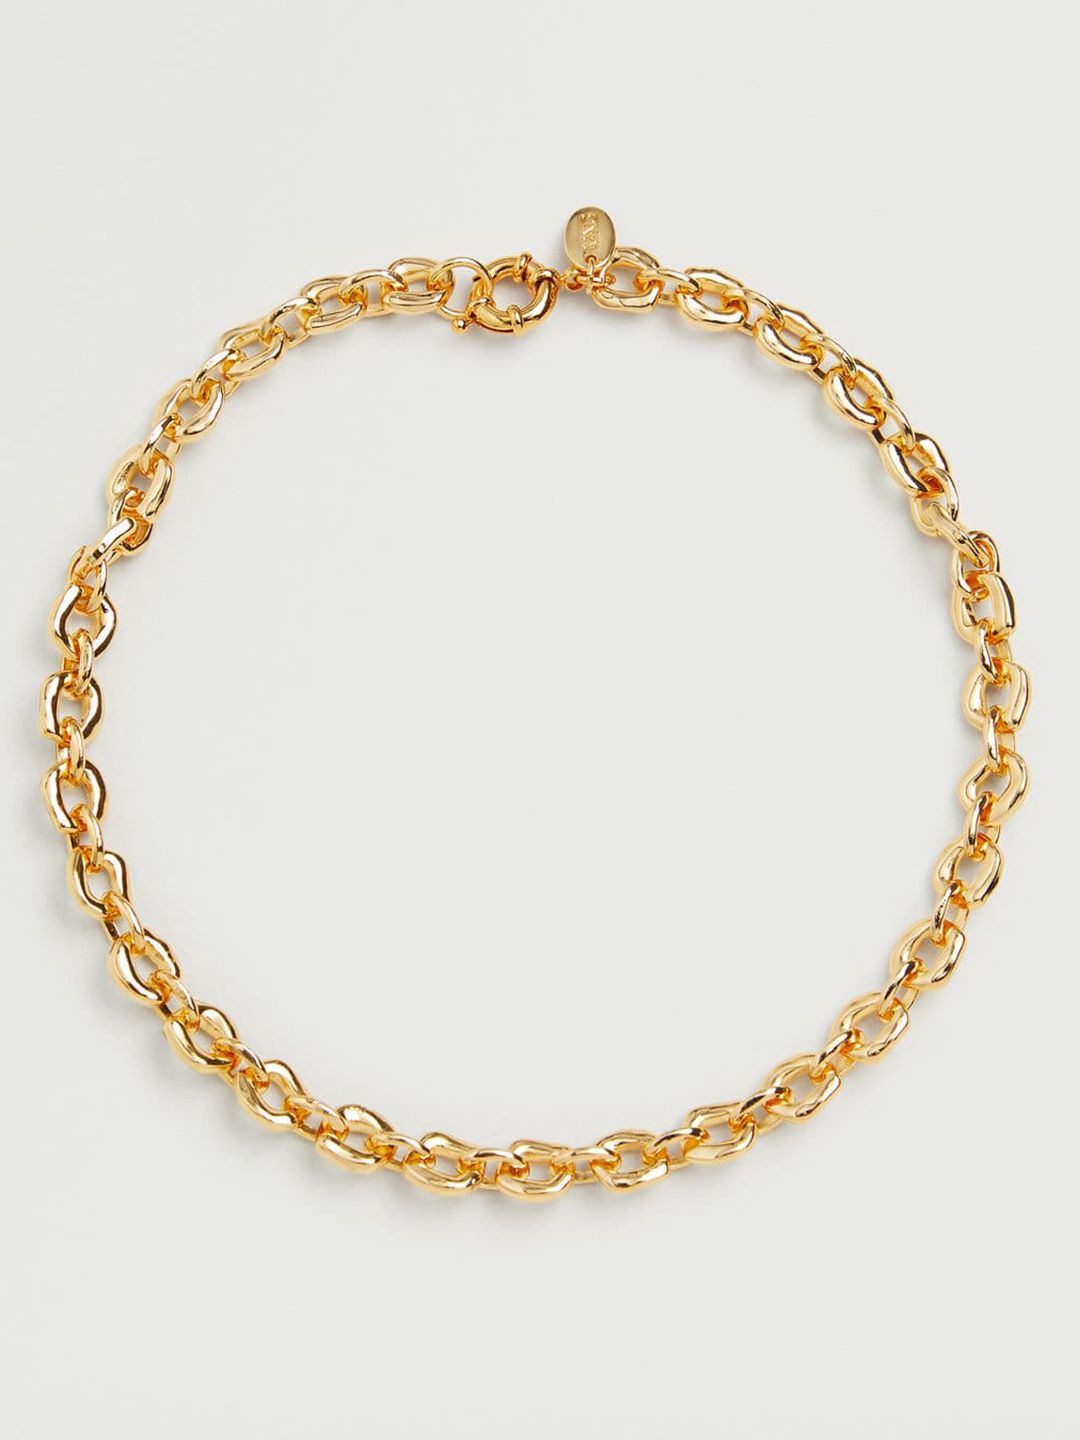 MANGO Women Gold-Toned Linked Chain Necklace Price in India